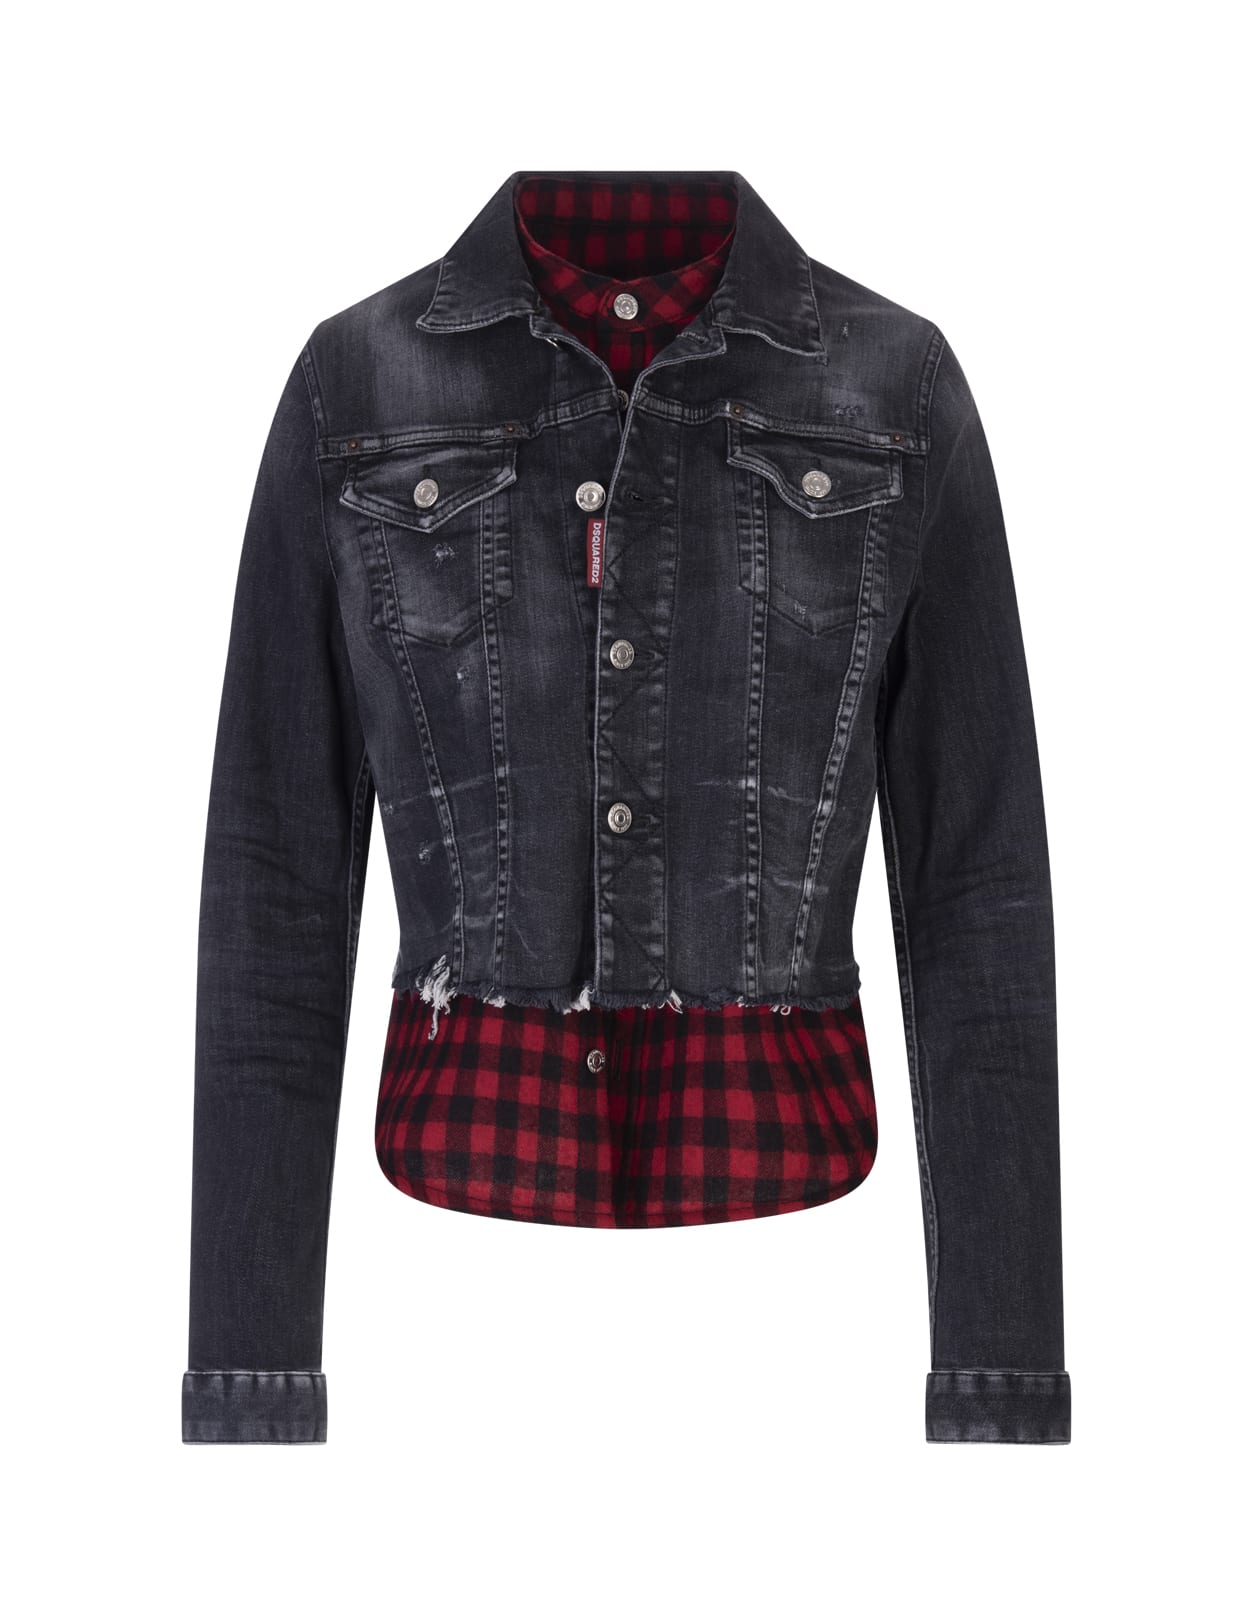 Dsquared2 Woman Black & Check Denim Jacket With Shirt Insert